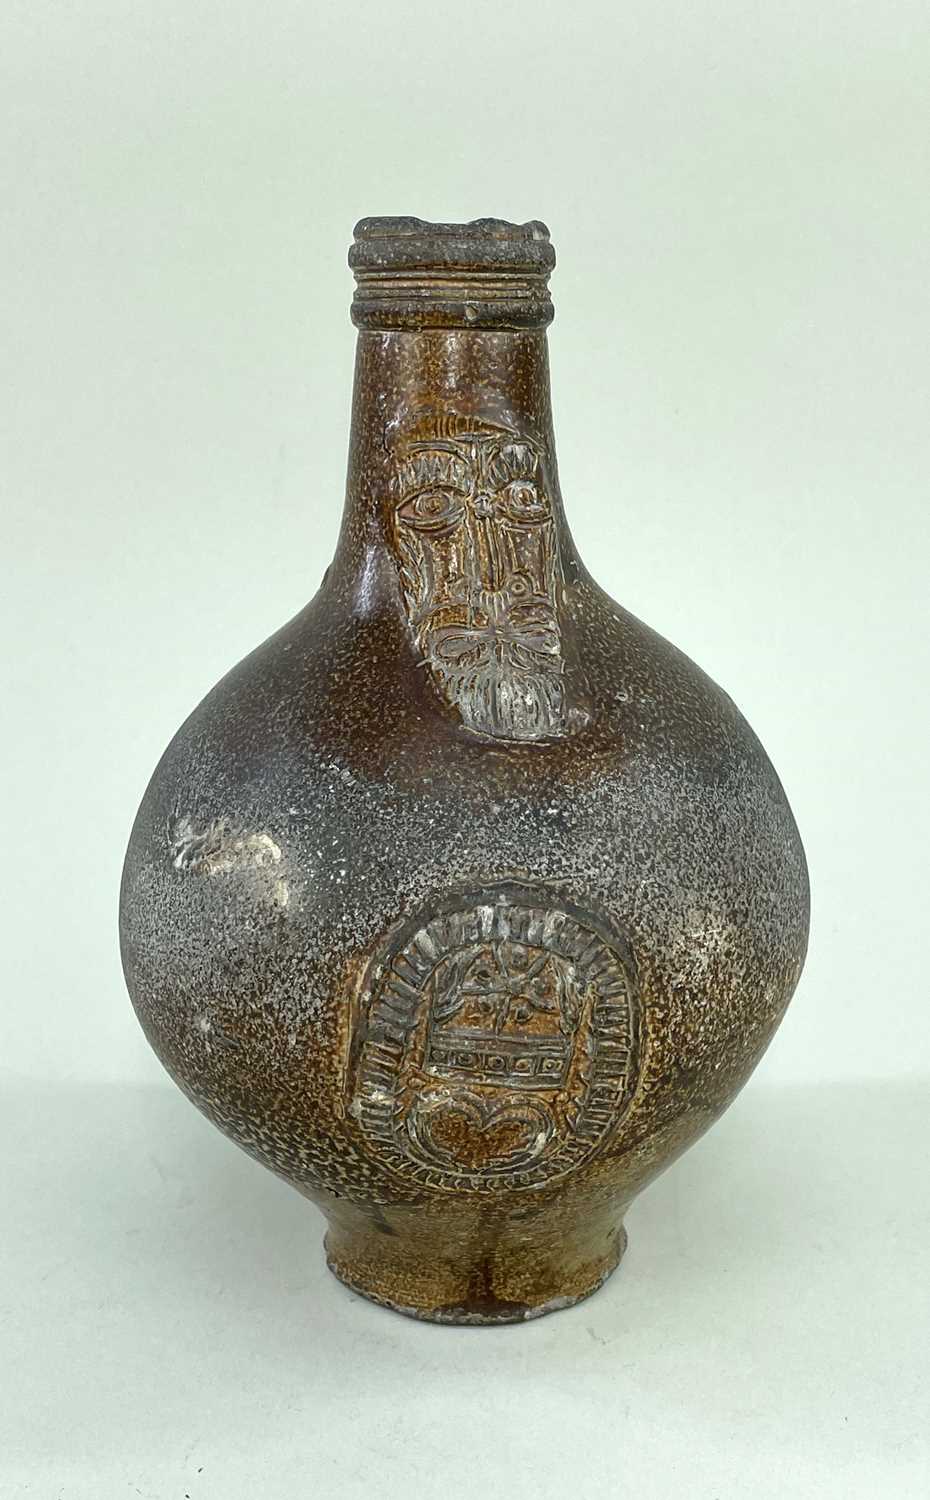 17TH CENTURY GERMAN STONEWARE BELLARMINE, decorated with mask and coat of arms, strap handle,